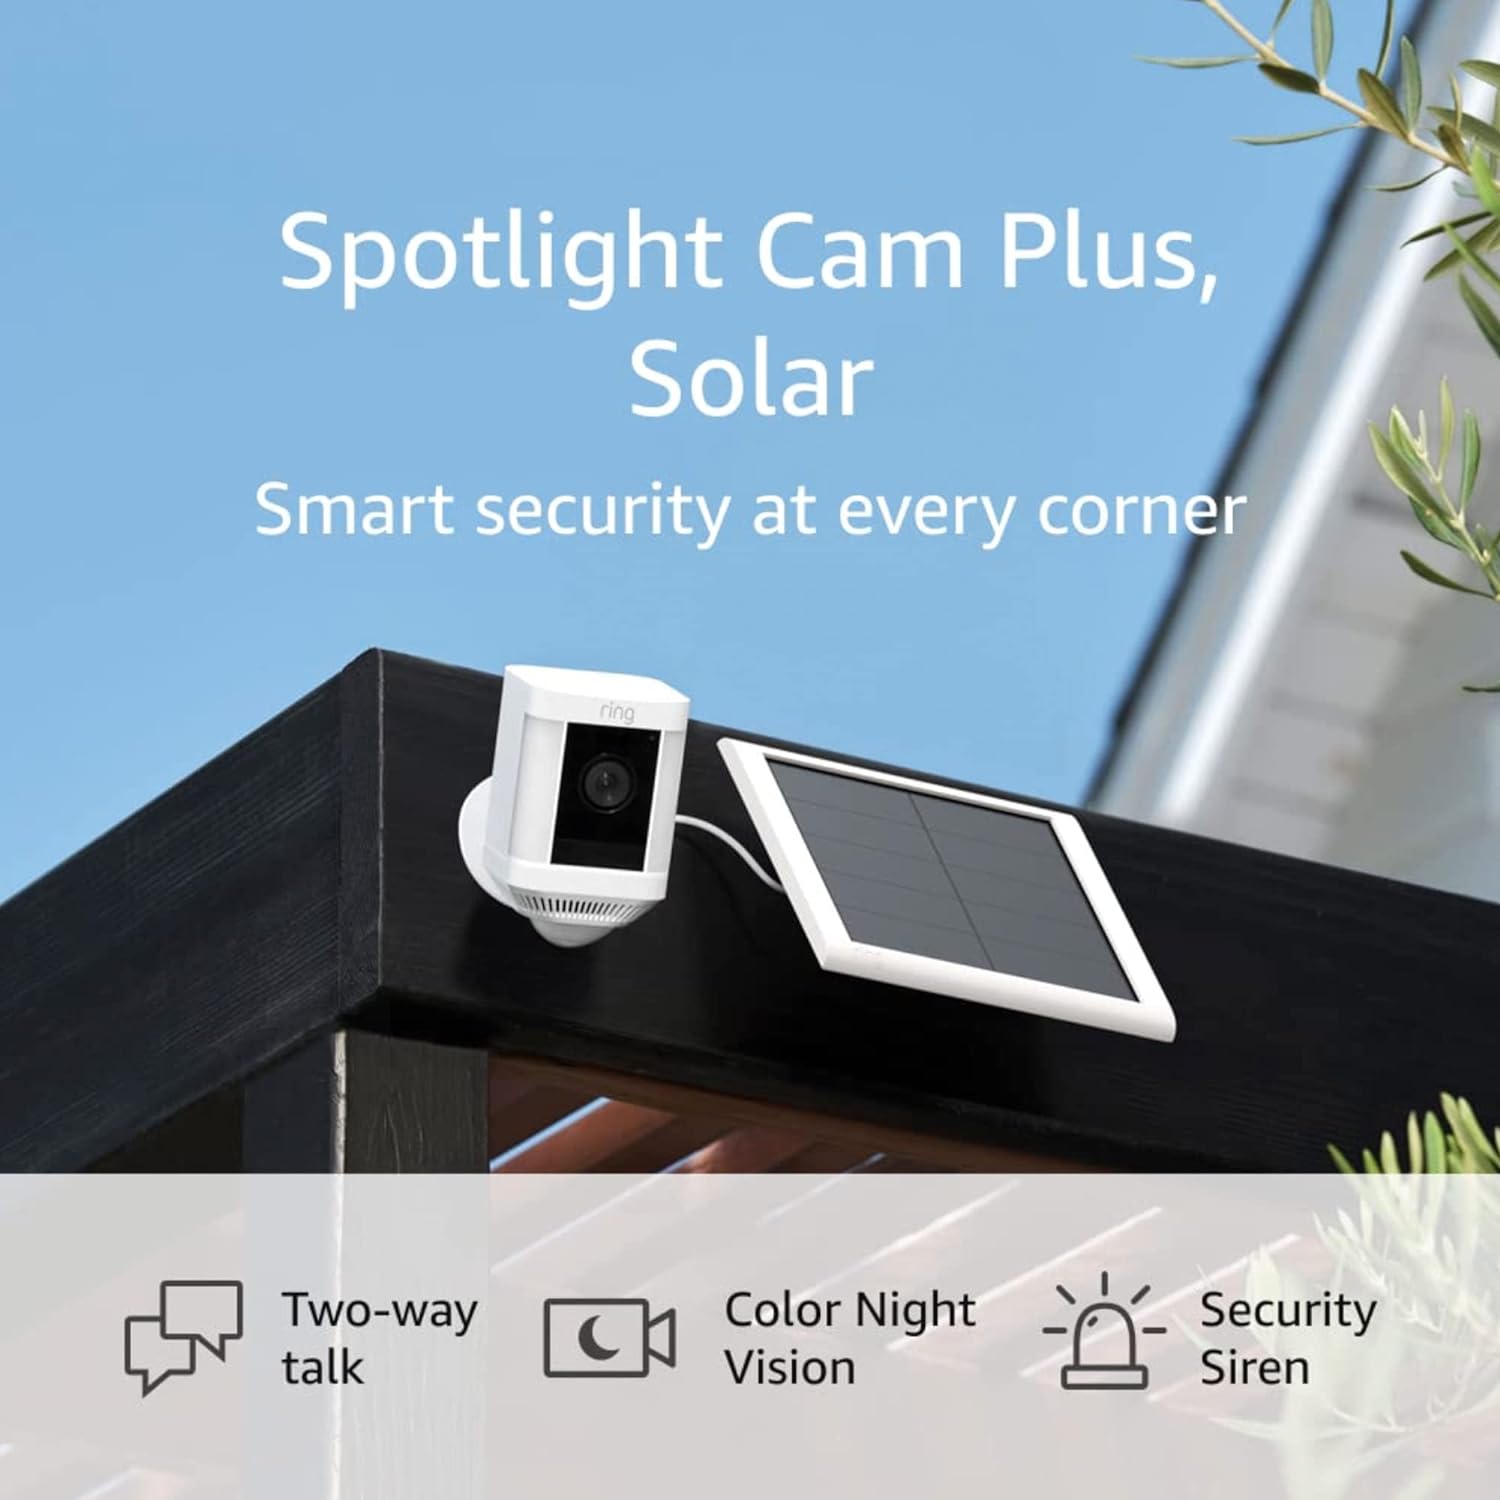 Comparing 5 Solar-Powered Security Cameras: Features and Performance